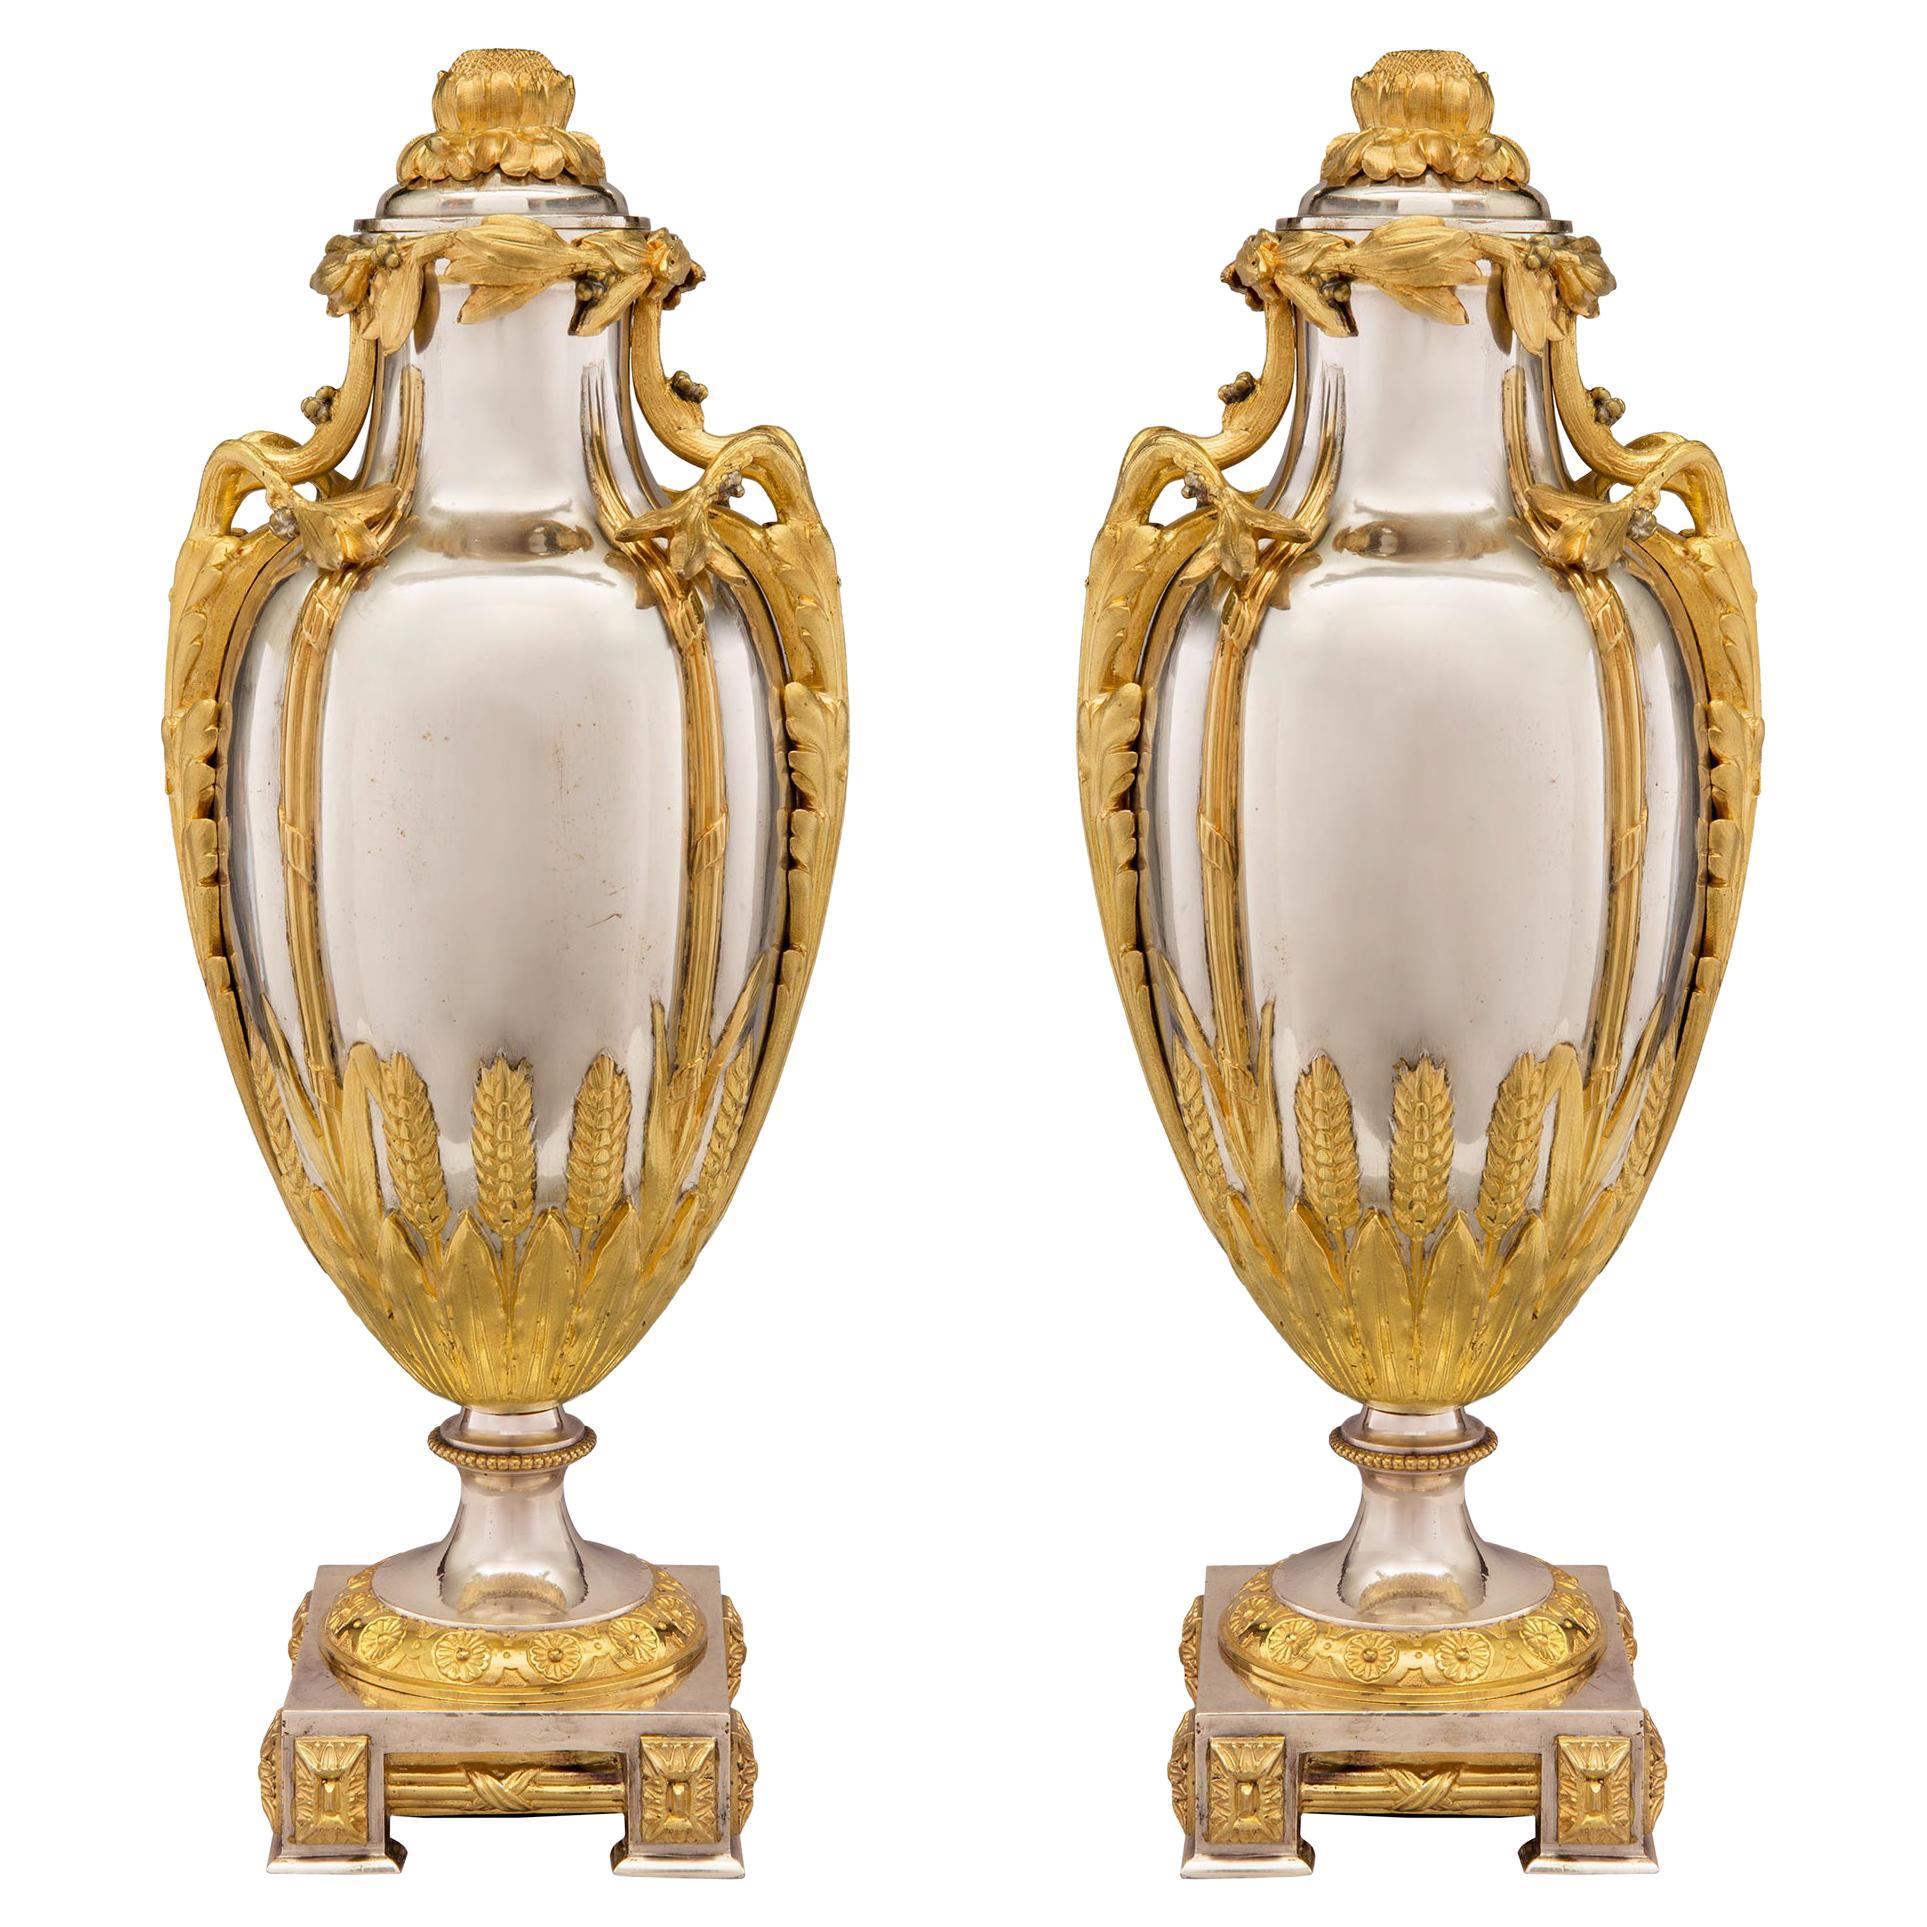 Pair of French 19th Century Louis XVI Style Silvered Bronze and Ormolu Urns